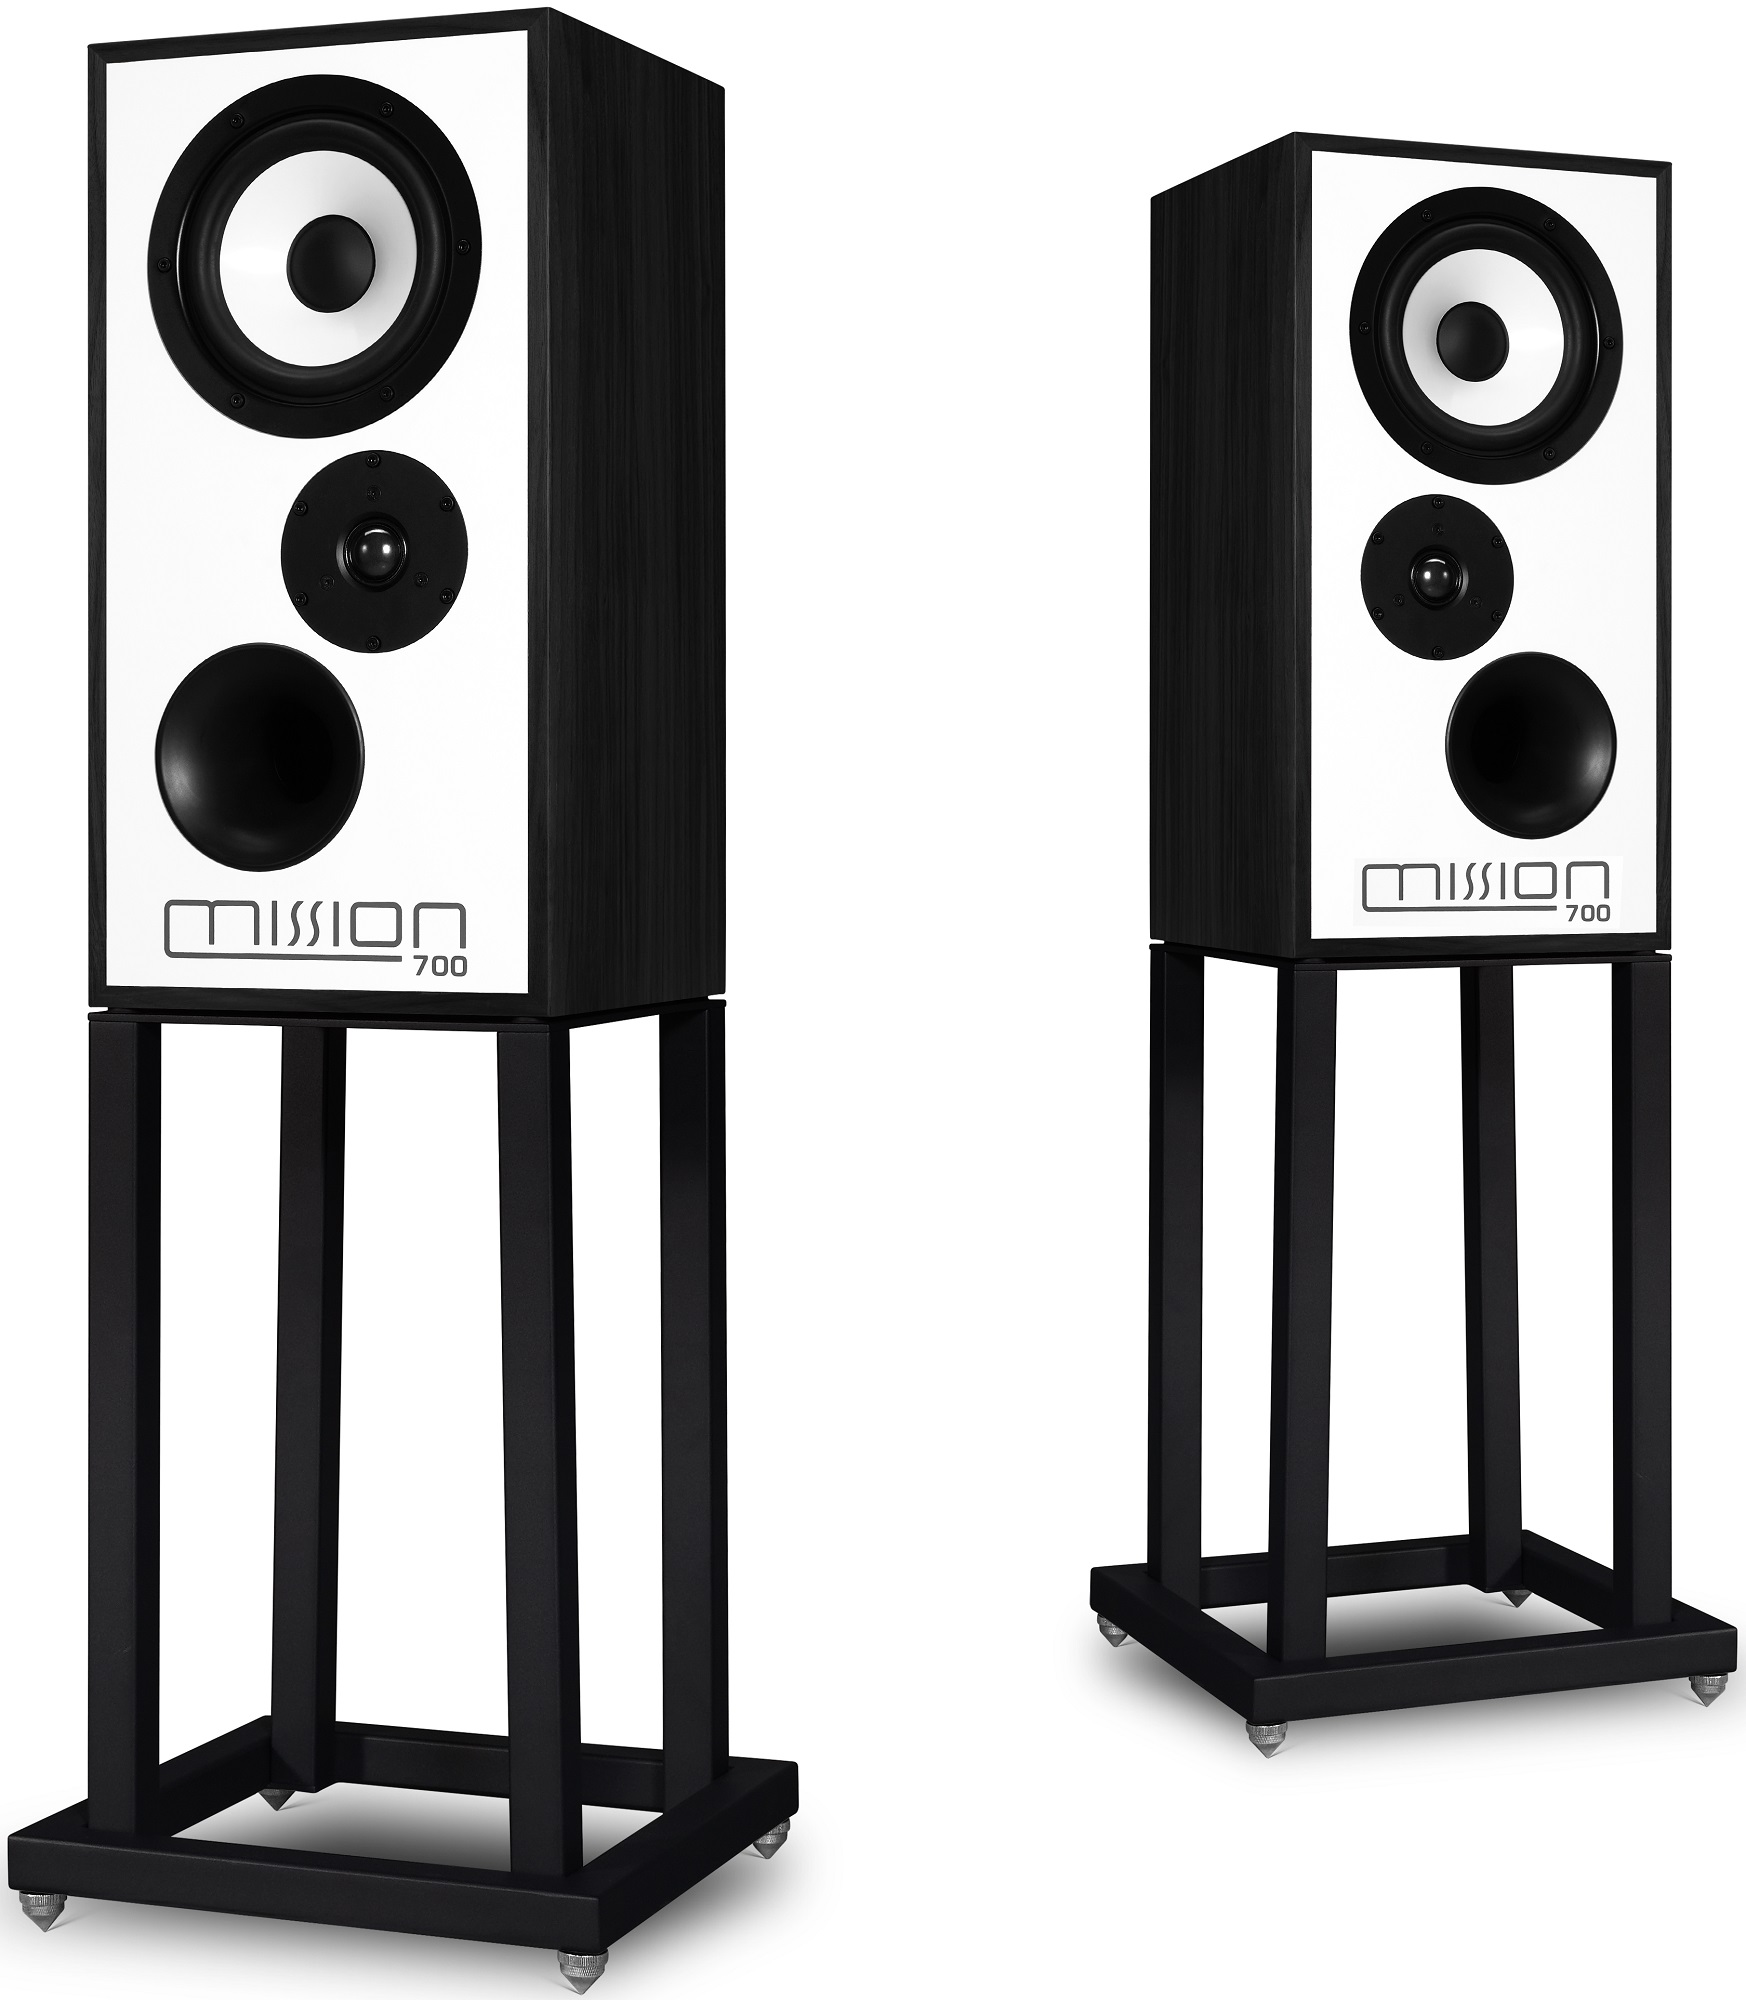 mission-700-classic-loudspeakers-with-stands-black-oak-pair